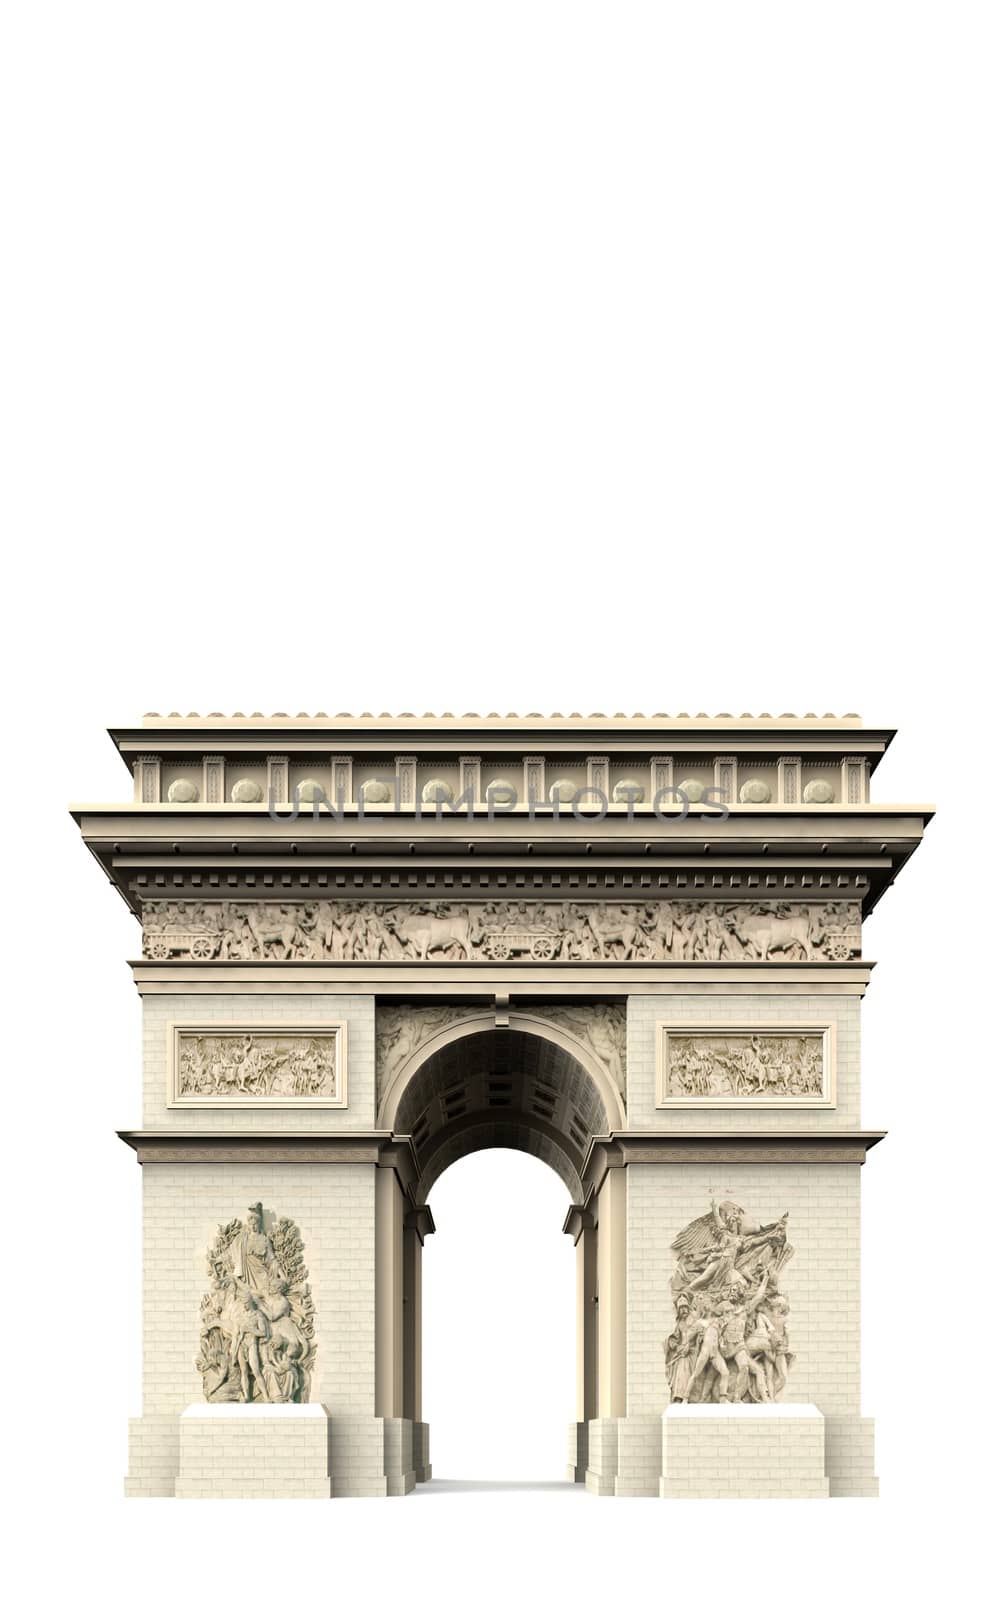 The Arc de Triomphe is a monument built from 1806 to 1836 on the Place Charles de Gaulle in Paris.